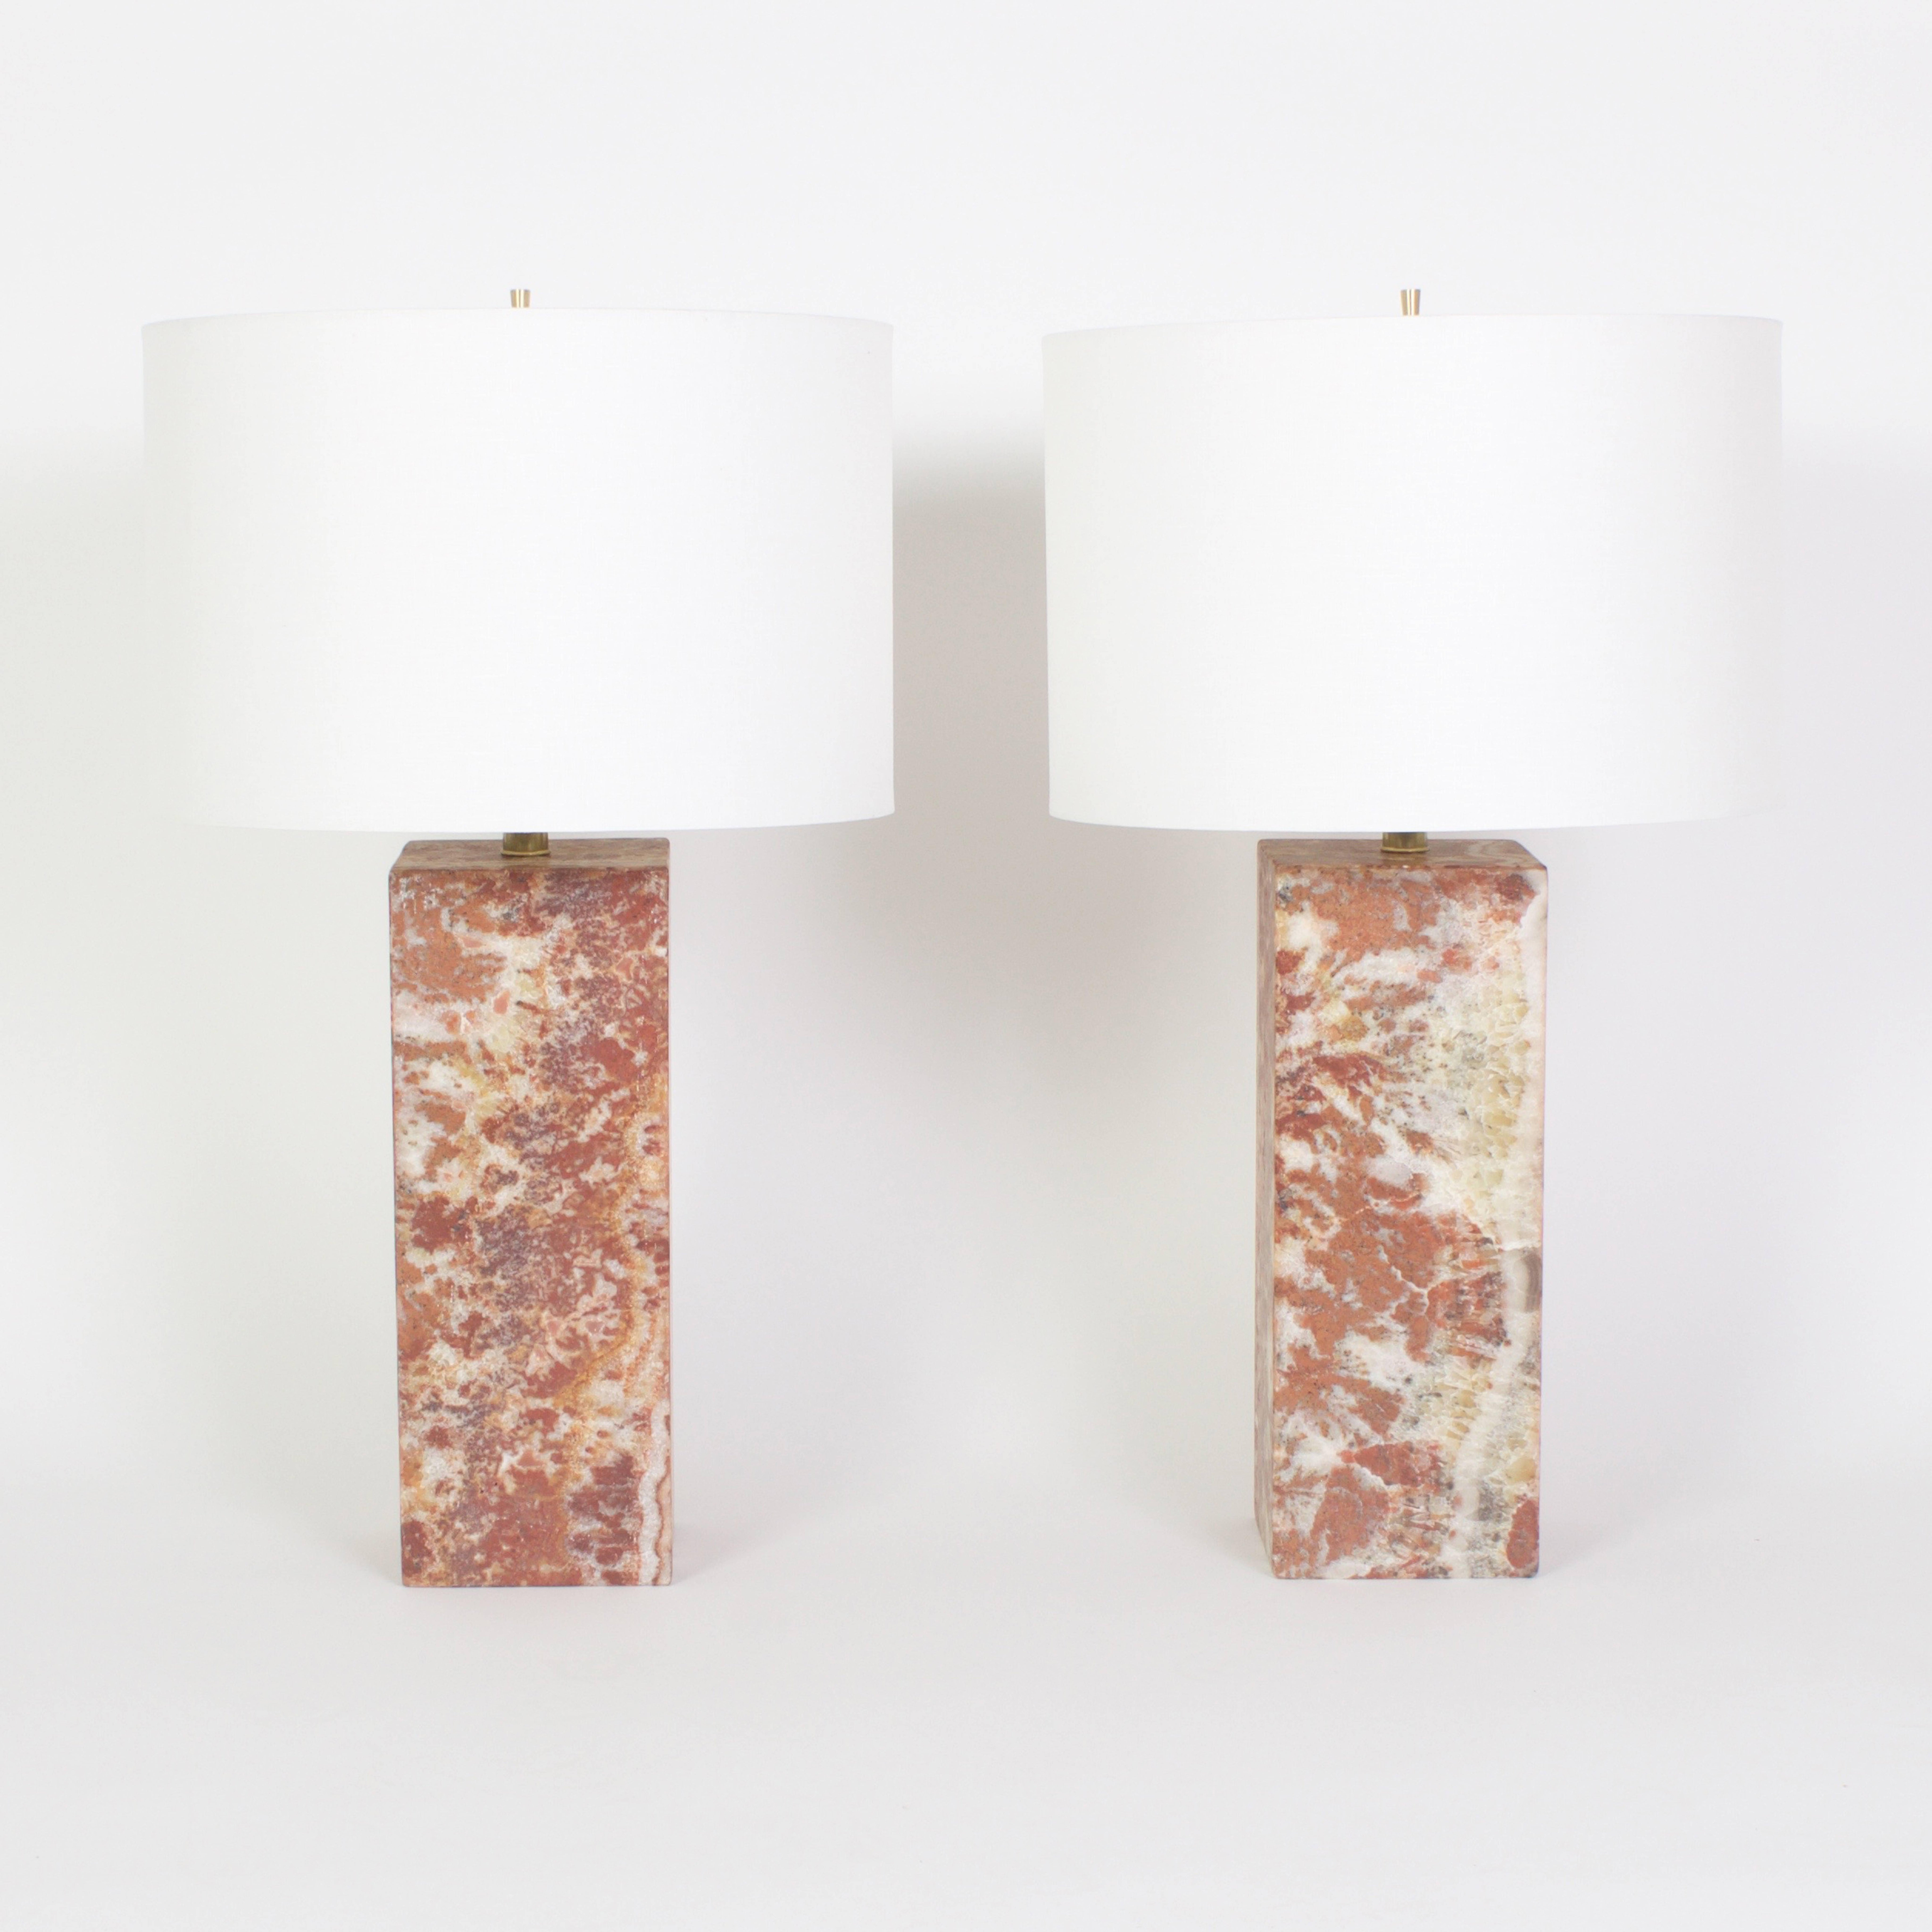 Sleek Mid-Century Modern pair of table lamps with rectangular bases composed of rouge quartz for an earthy, yet chic look.